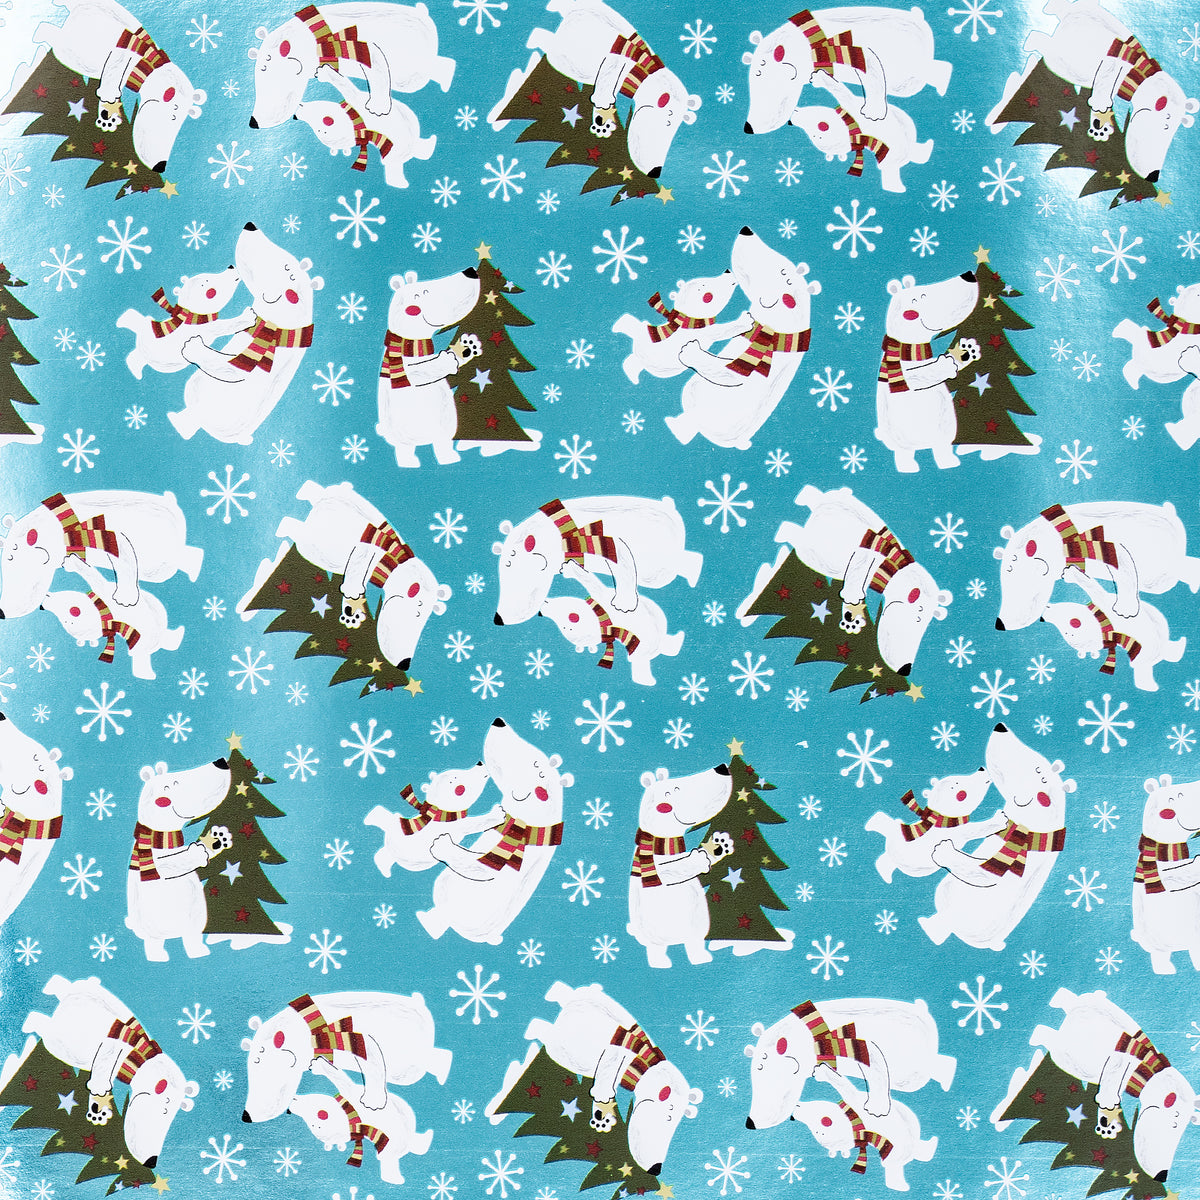  RUSPEPA Christmas Wrapping Paper, Jumbo Roll Kraft Paper -  Polar Bear and Penguin Design for Holiday Gift Wrap - 24 Inches x 100 Feet  : Health & Household